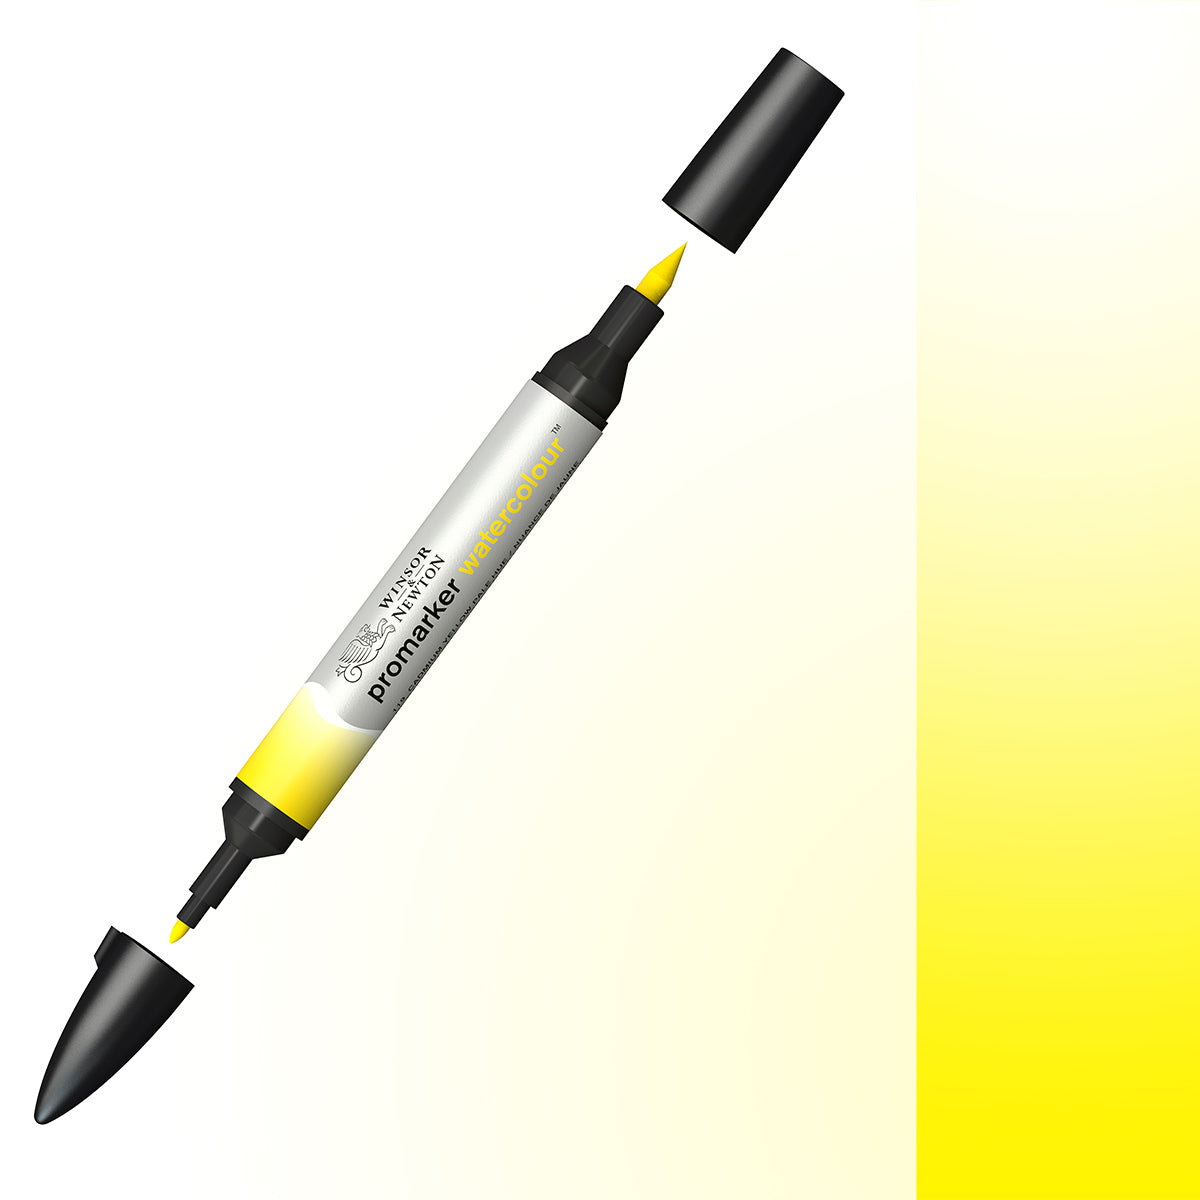 Winsor & Newton - Promarker Watercolor - CAD Yellow Pale Hue 119